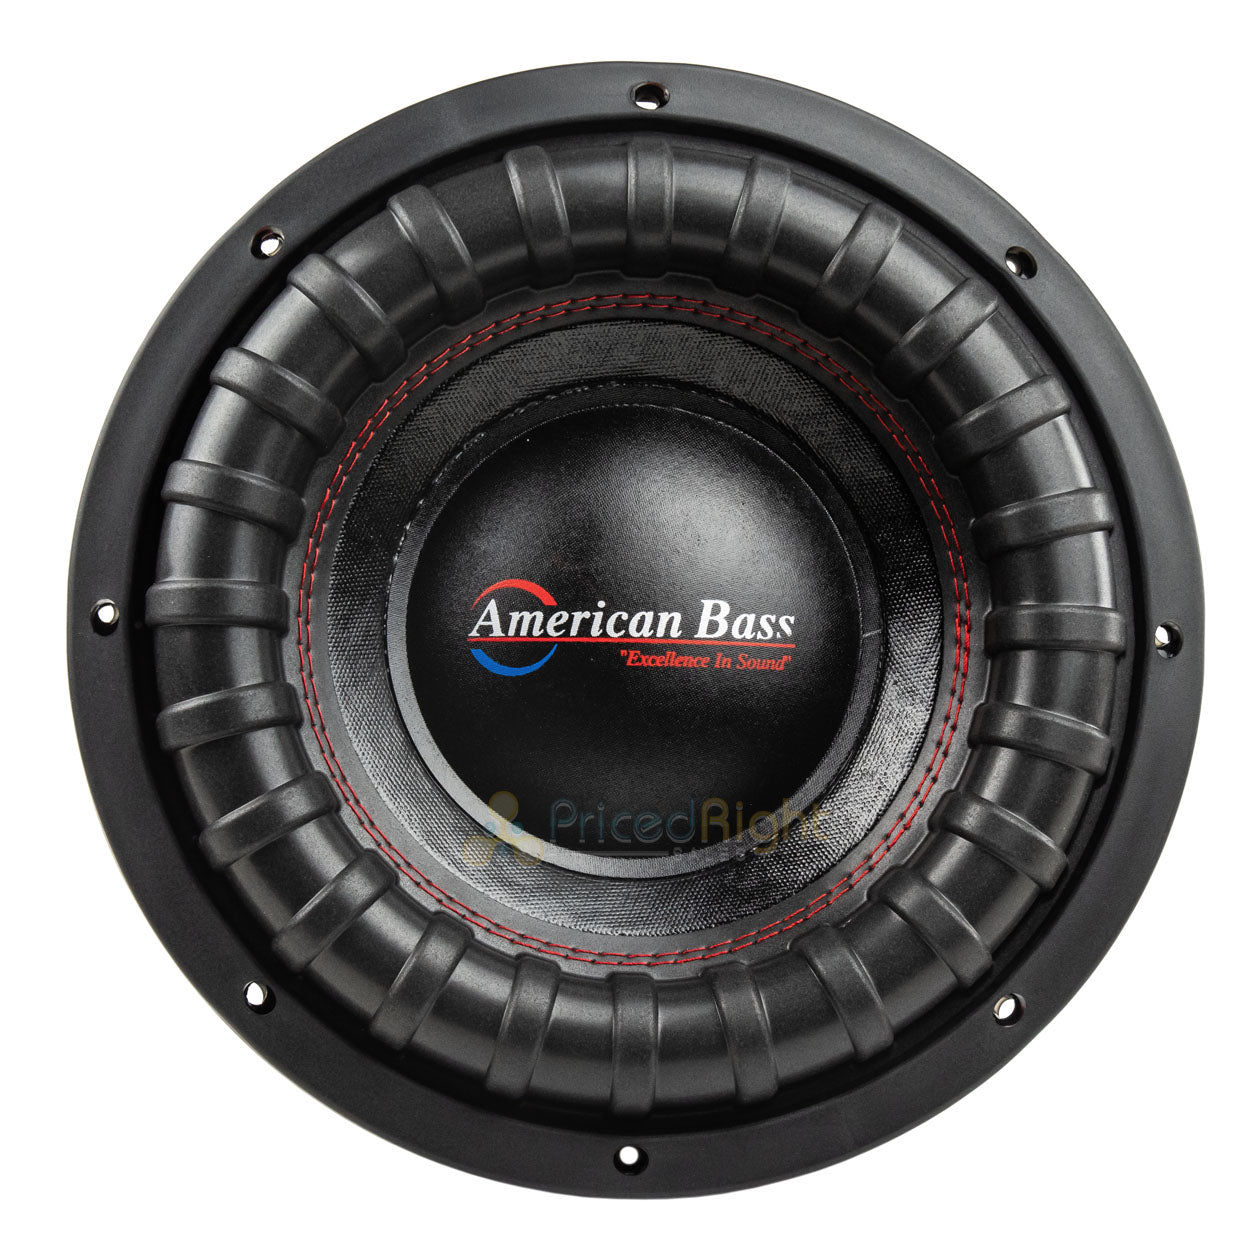 American Bass 10" Subwoofers Dual 4 Ohm 3000 Watts Max Car Audio Sub 2 Pack